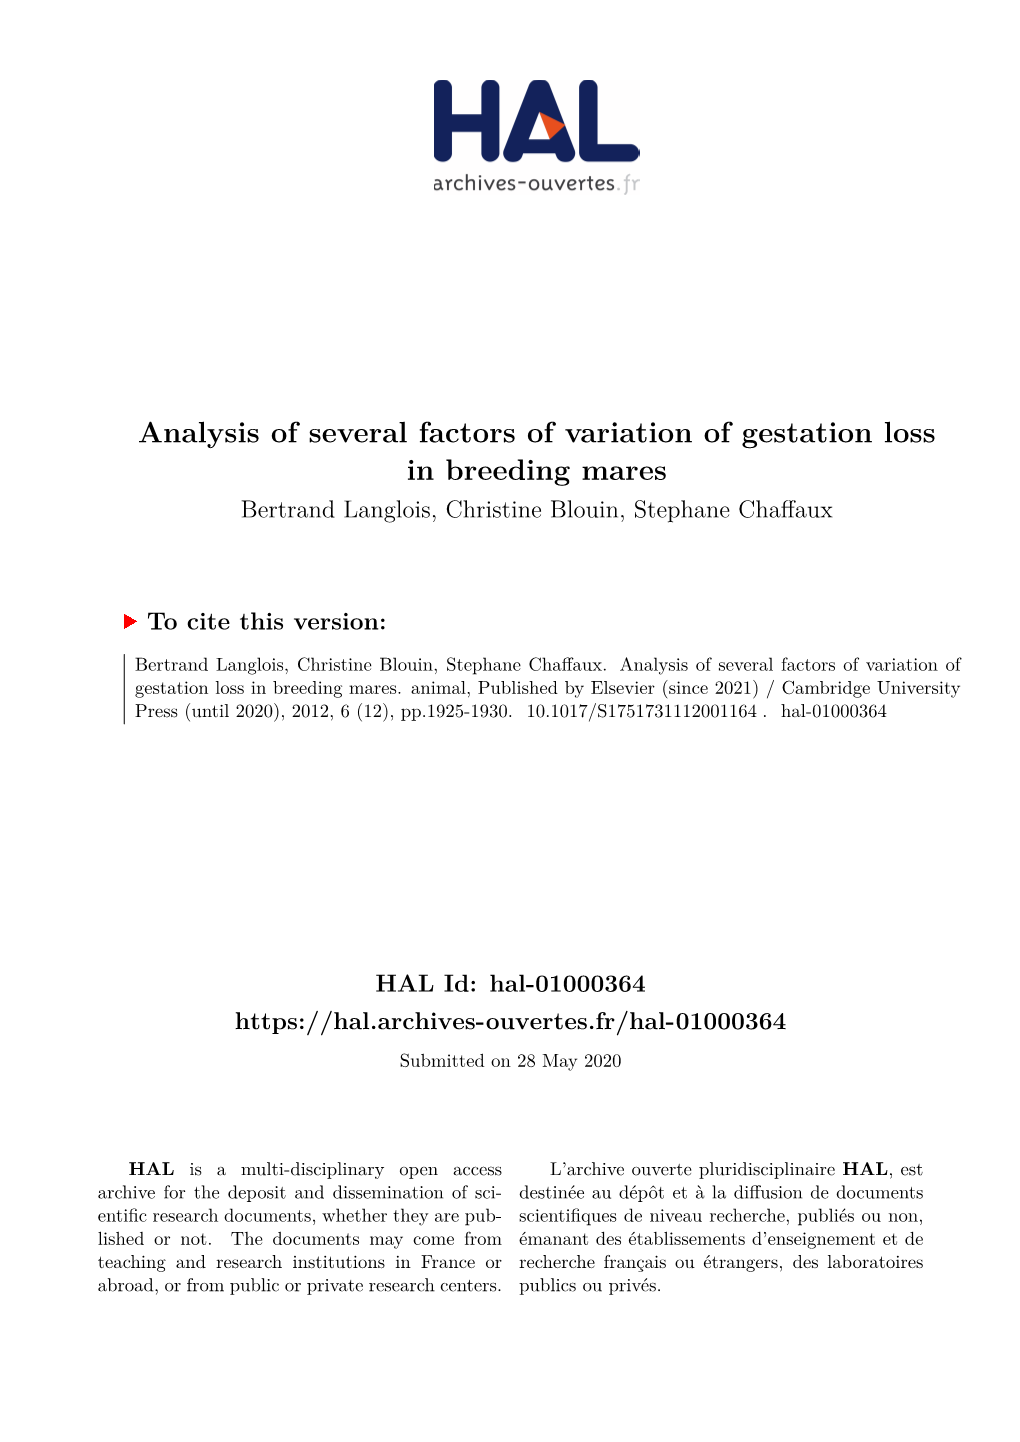 Analysis of Several Factors of Variation of Gestation Loss in Breeding Mares Bertrand Langlois, Christine Blouin, Stephane Chaffaux